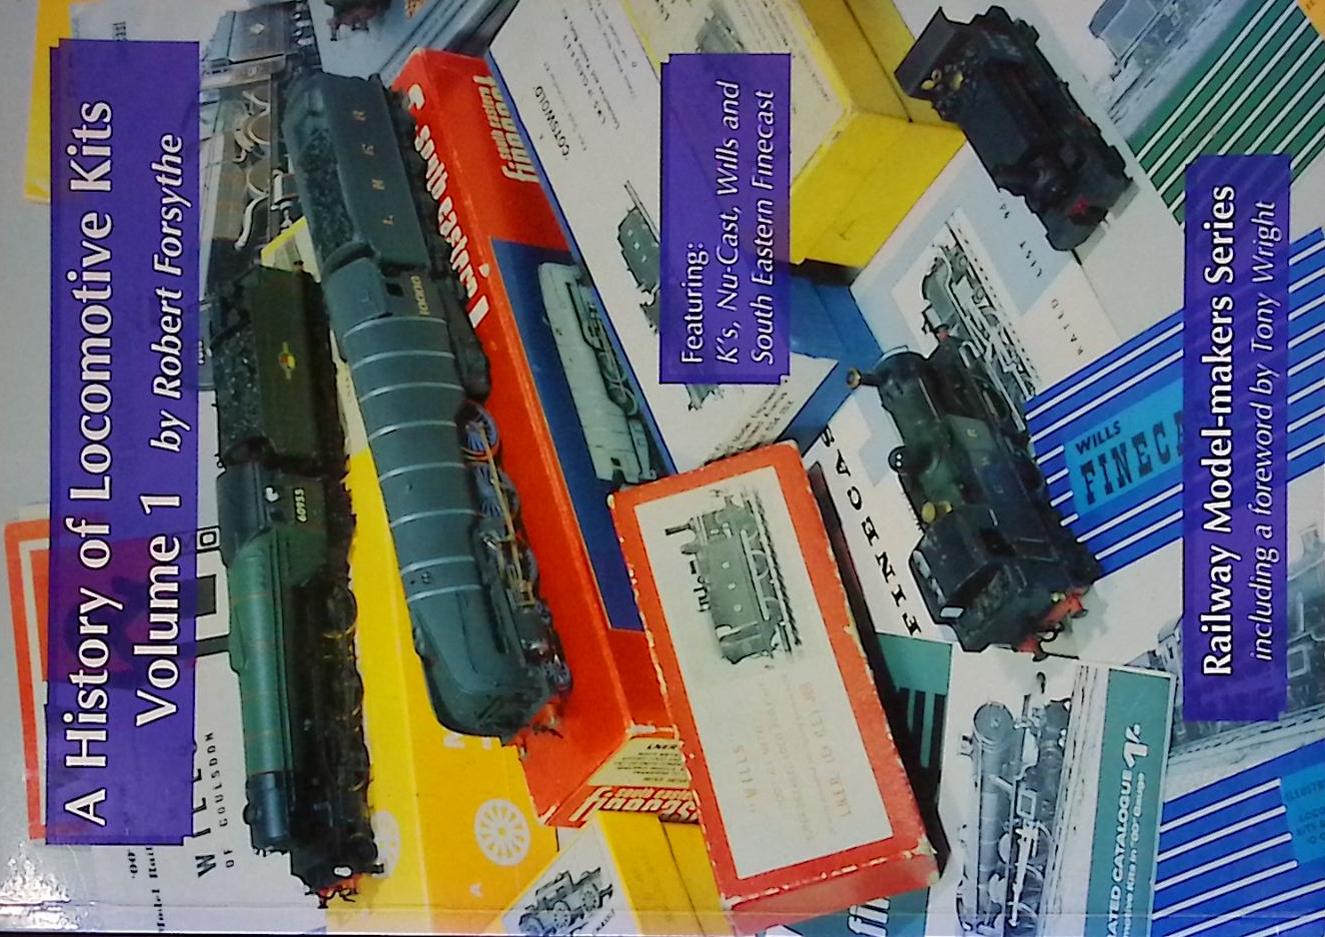 History of Locomotive Kits. Volume 1. Featuring: K's, Nu-cast, Wills and South Eastern Finecast.